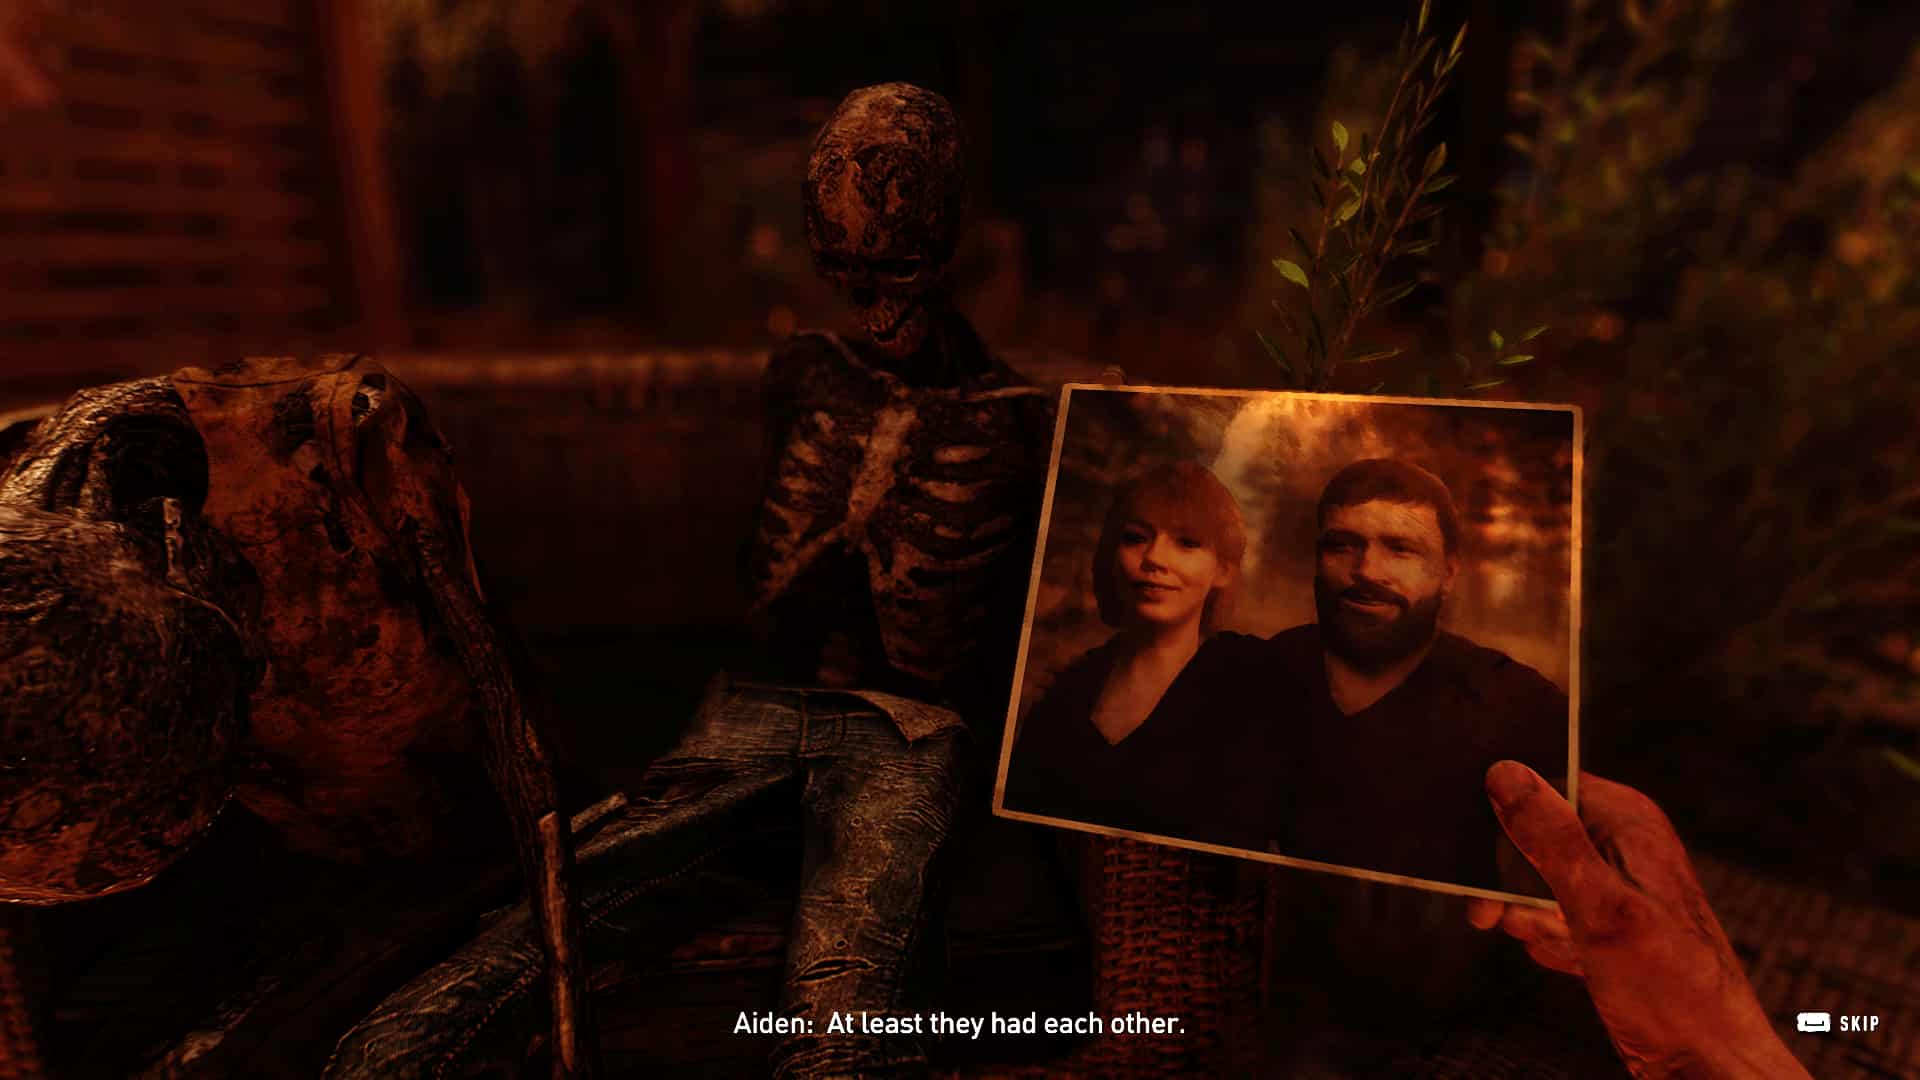 dying light 2 aiden looks at photo of couple